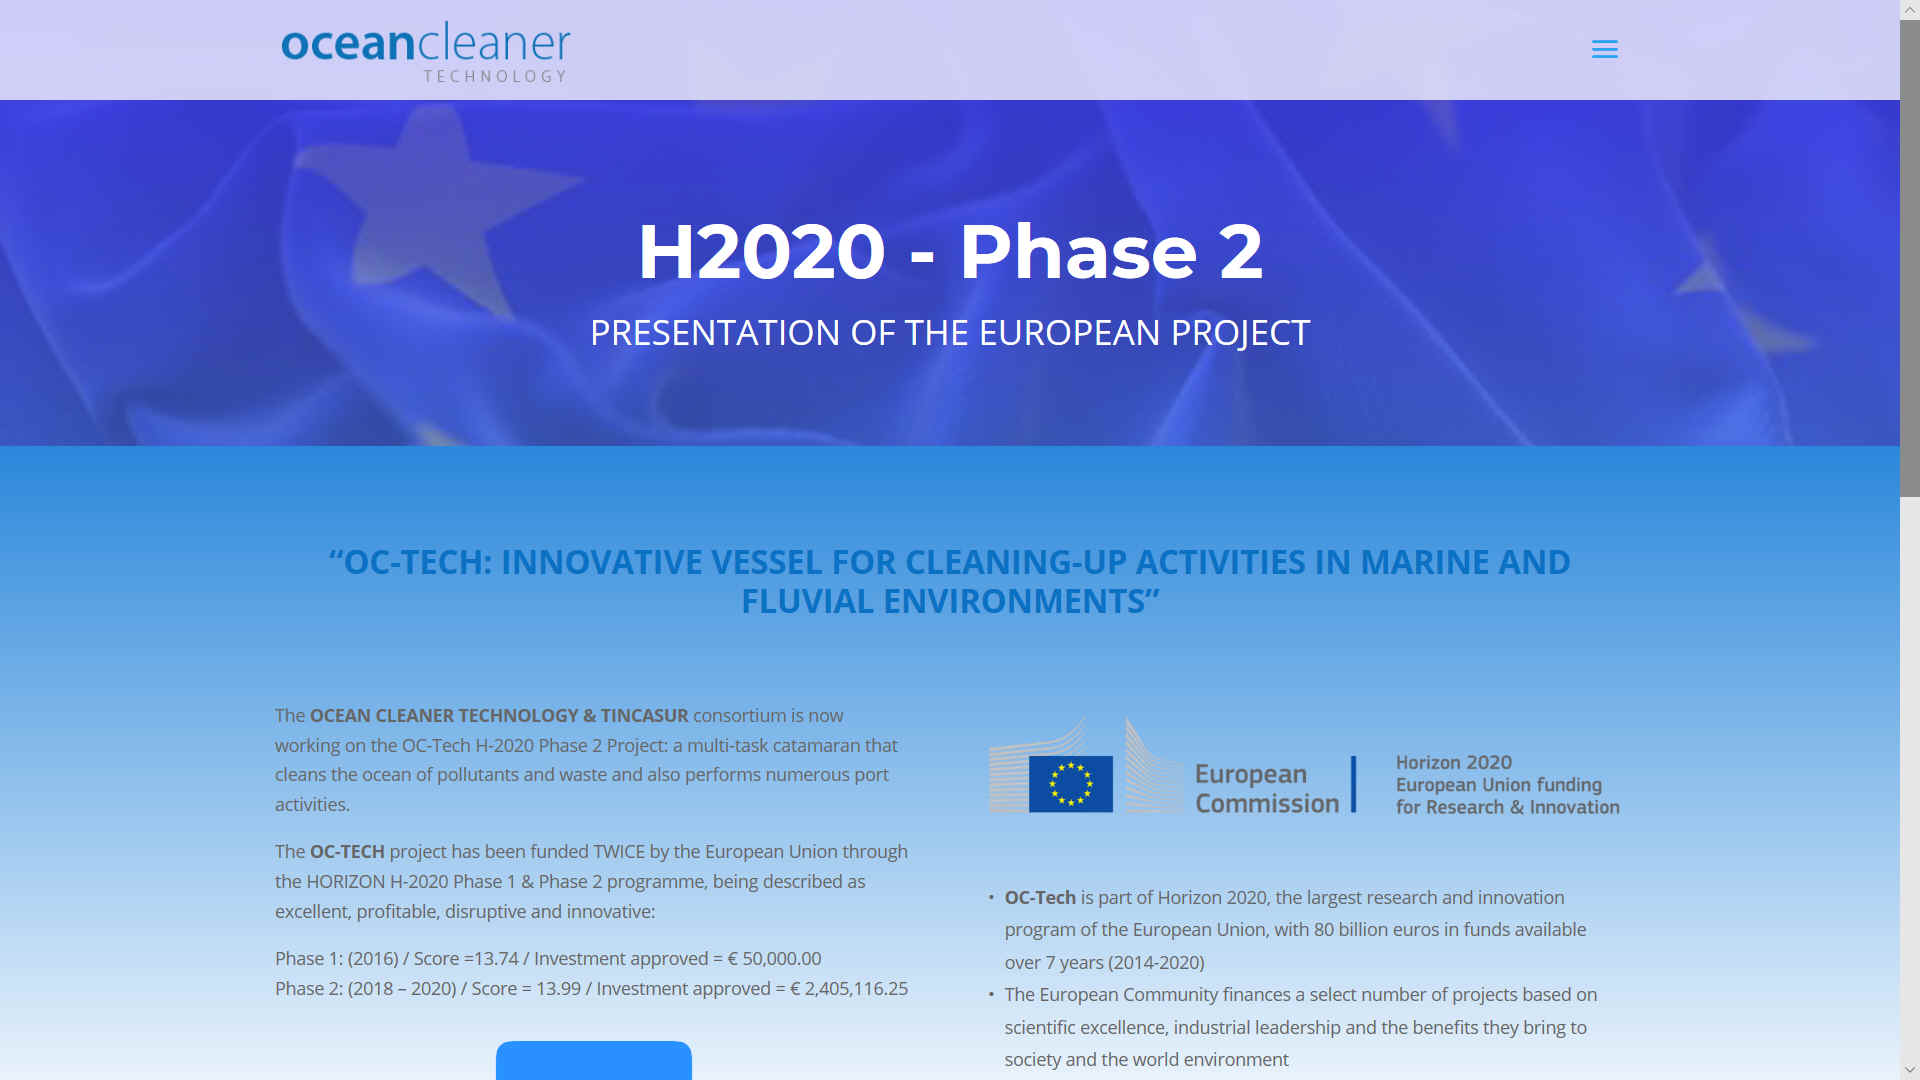 Horizon 2020 European Commission funded project